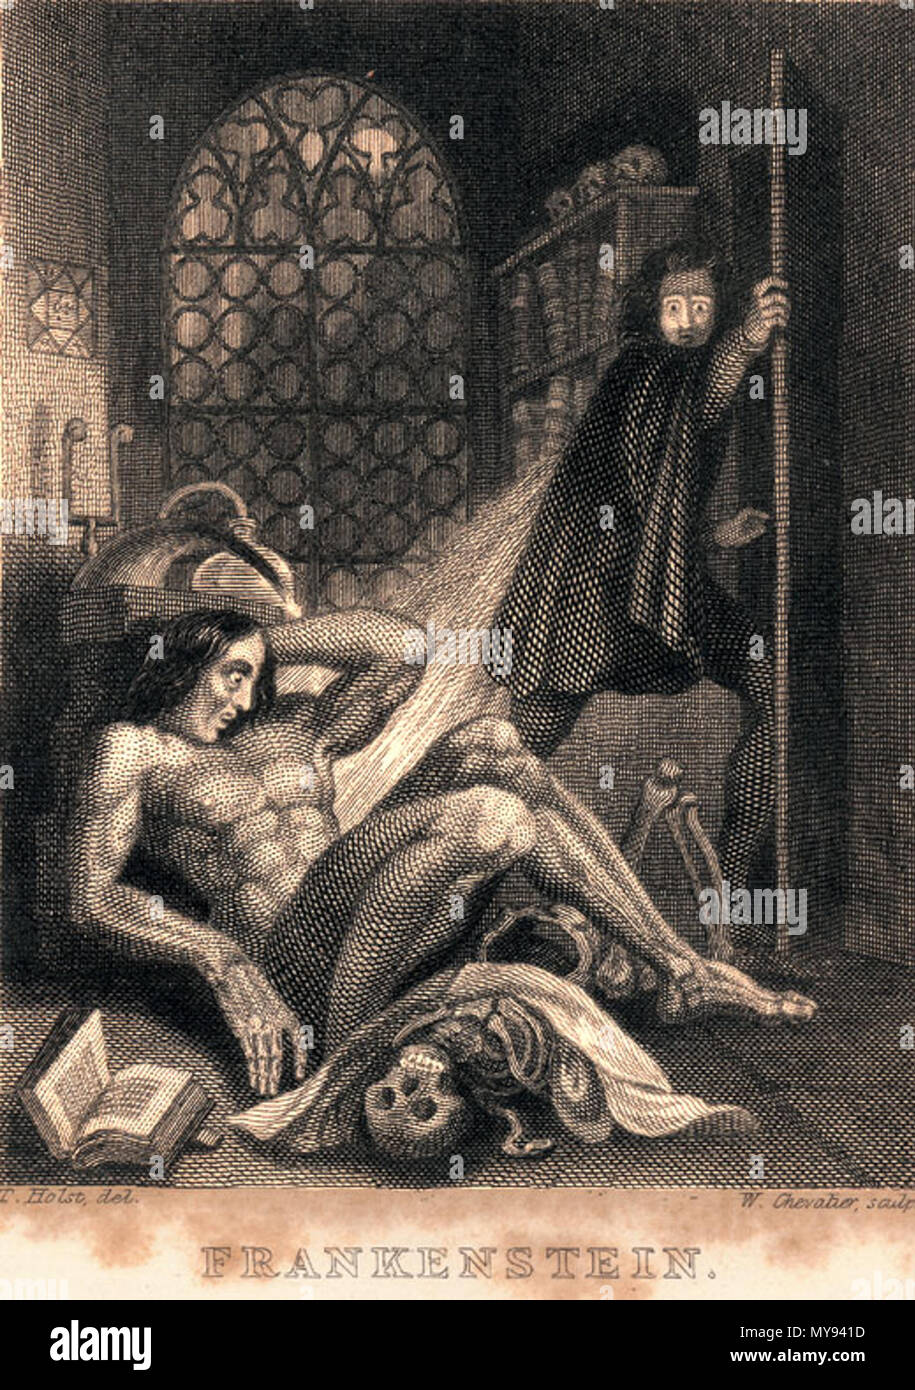 . English: Frontispiece to Mary Shelley, Frankenstein published by Colburn and Bentley, London 1831 Steel engraving in book 93 x 71 mm . 1831. Theodor von Holst 187 Frankenstein engraved Stock Photo